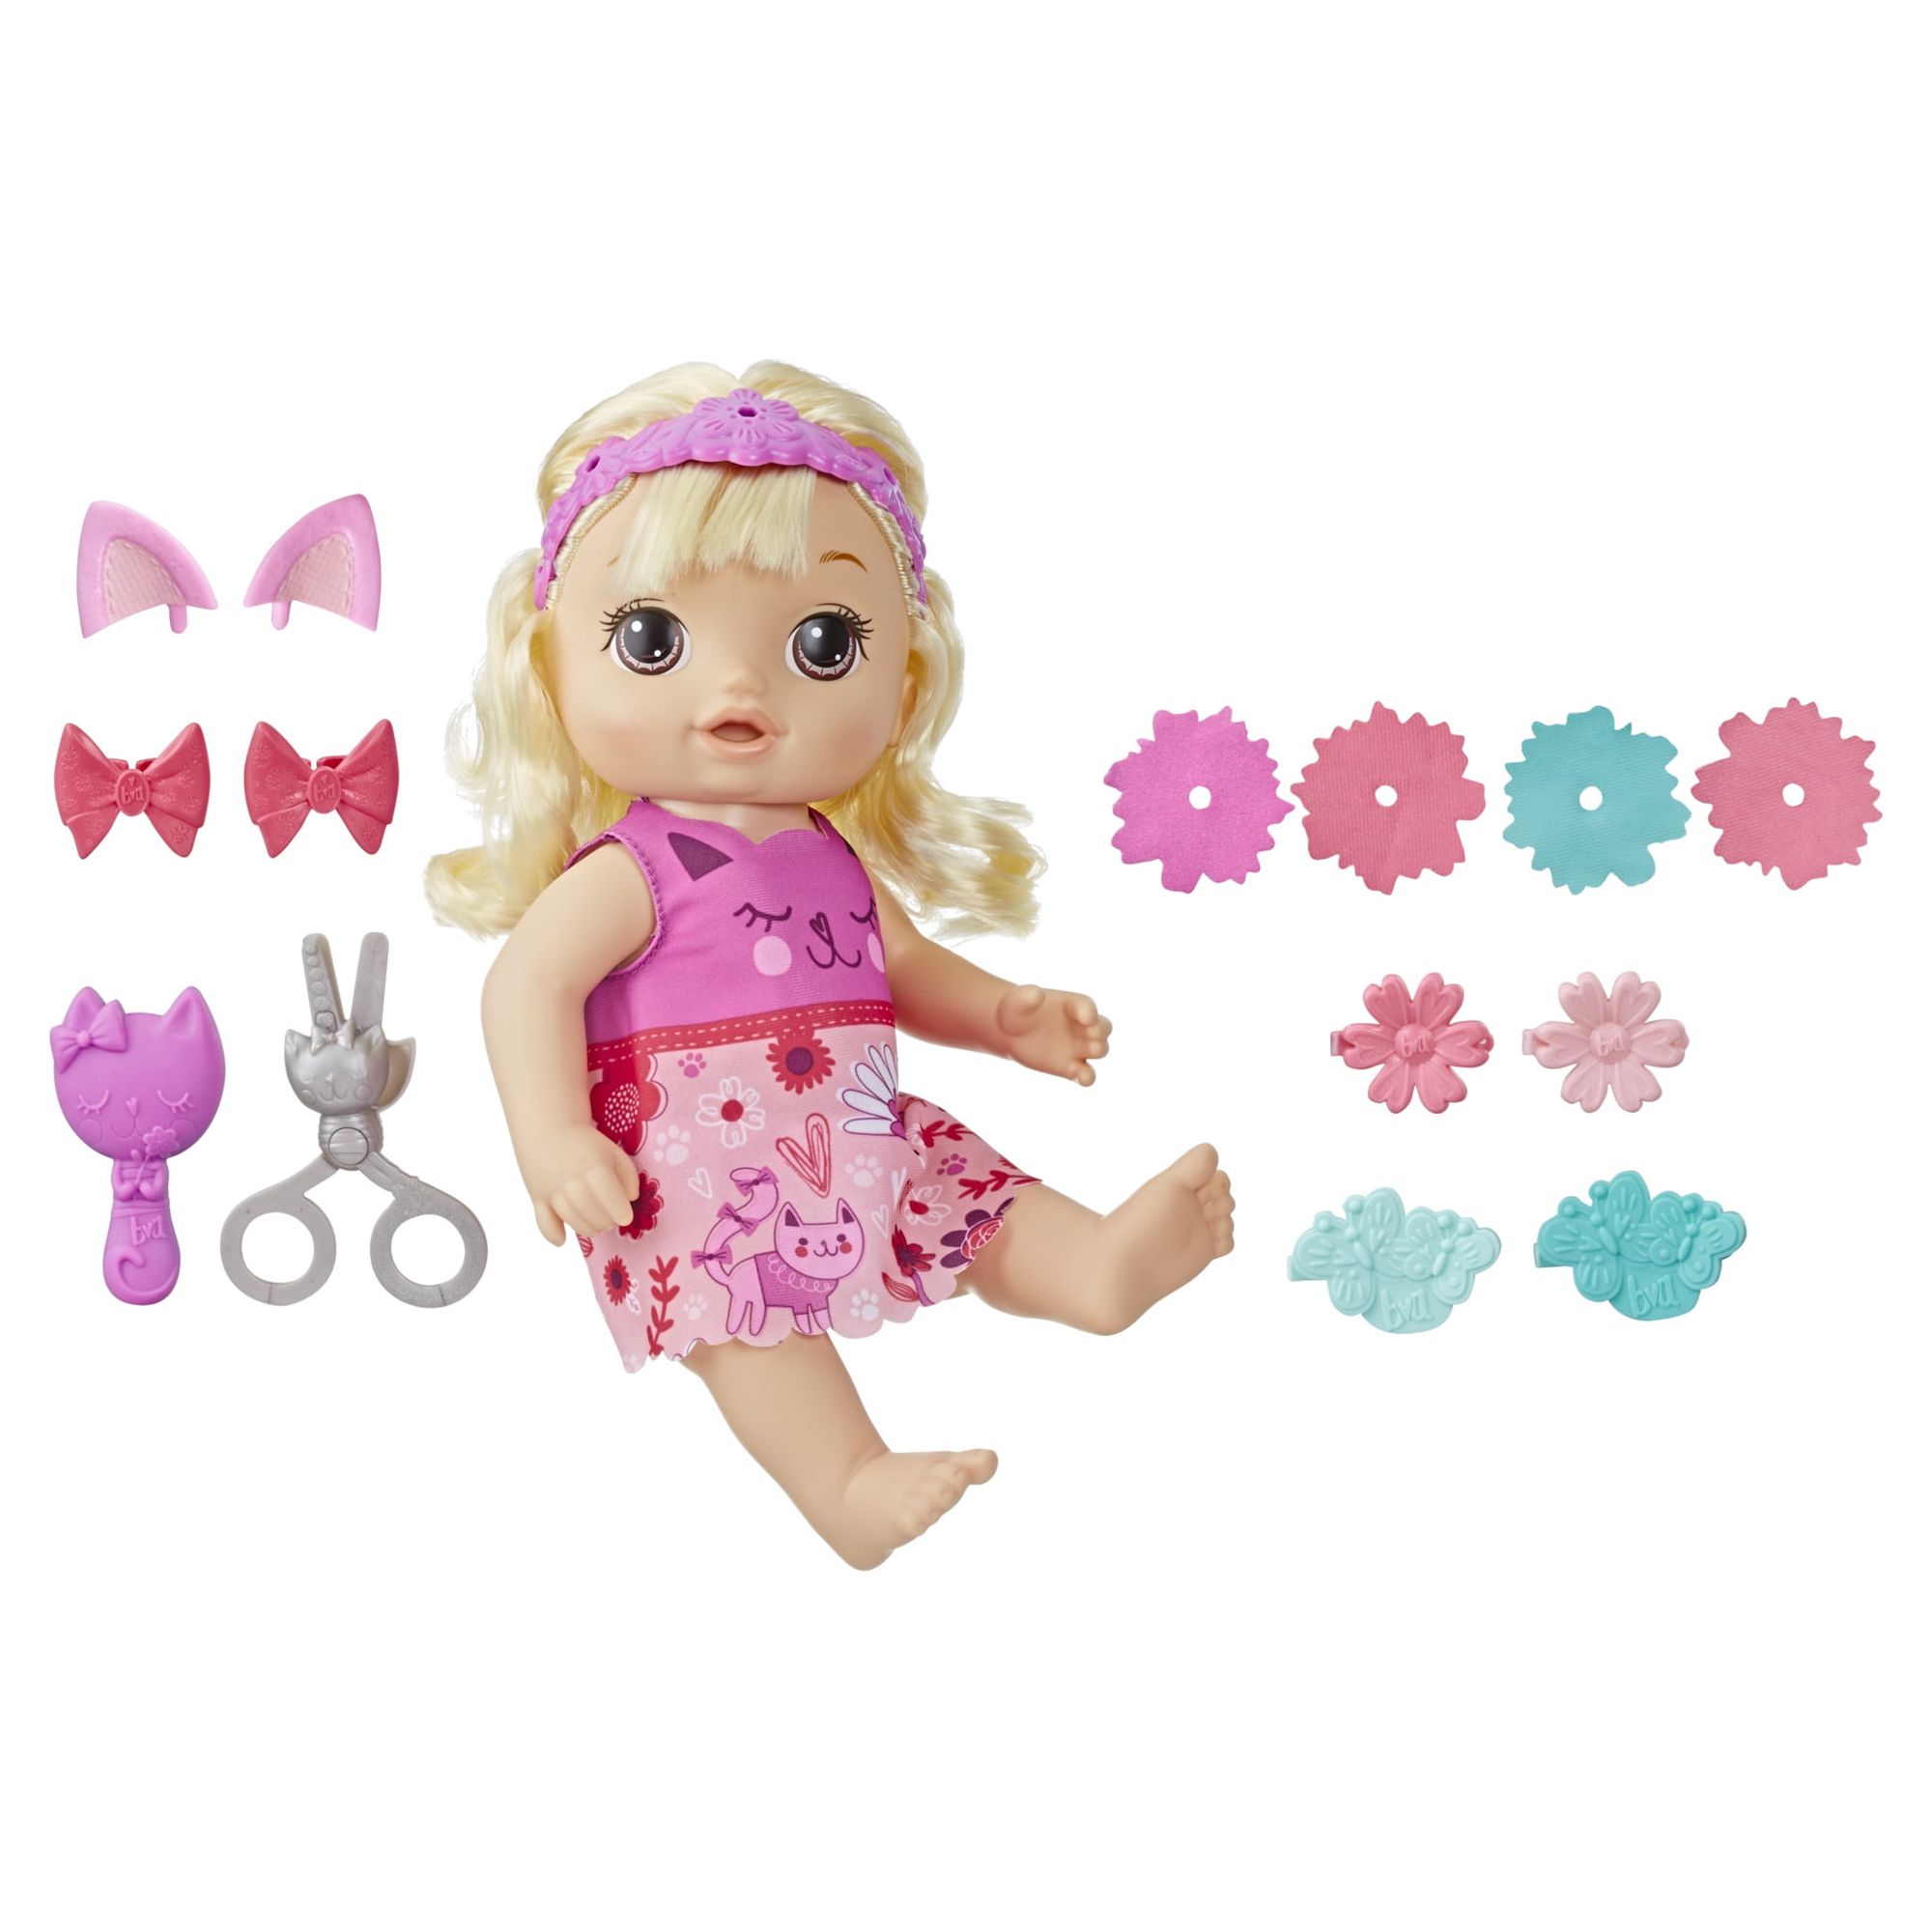 Baby Alive: Snip 'n Style Baby 15-Inch Doll Blonde Hair, Brown Eyes Kids Toy for Boys and Girls - image 1 of 13